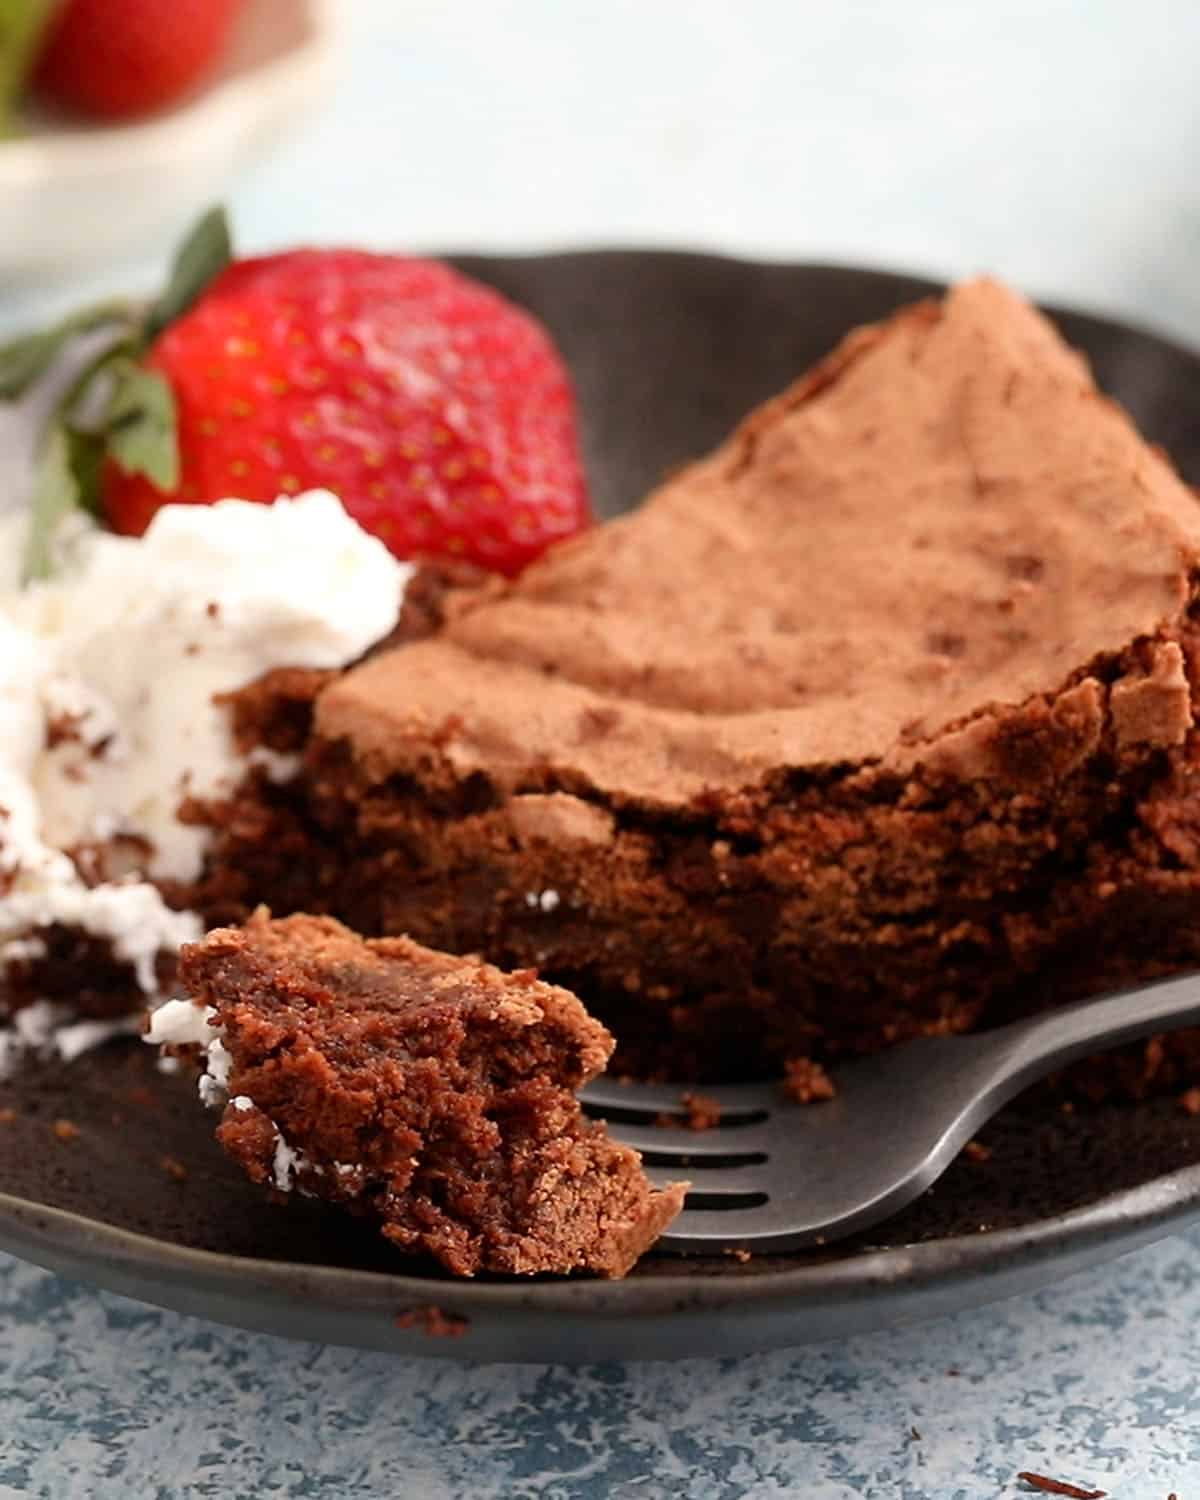 one slice of chocolate cake in a black plate along with one strawberry and whipped cream.